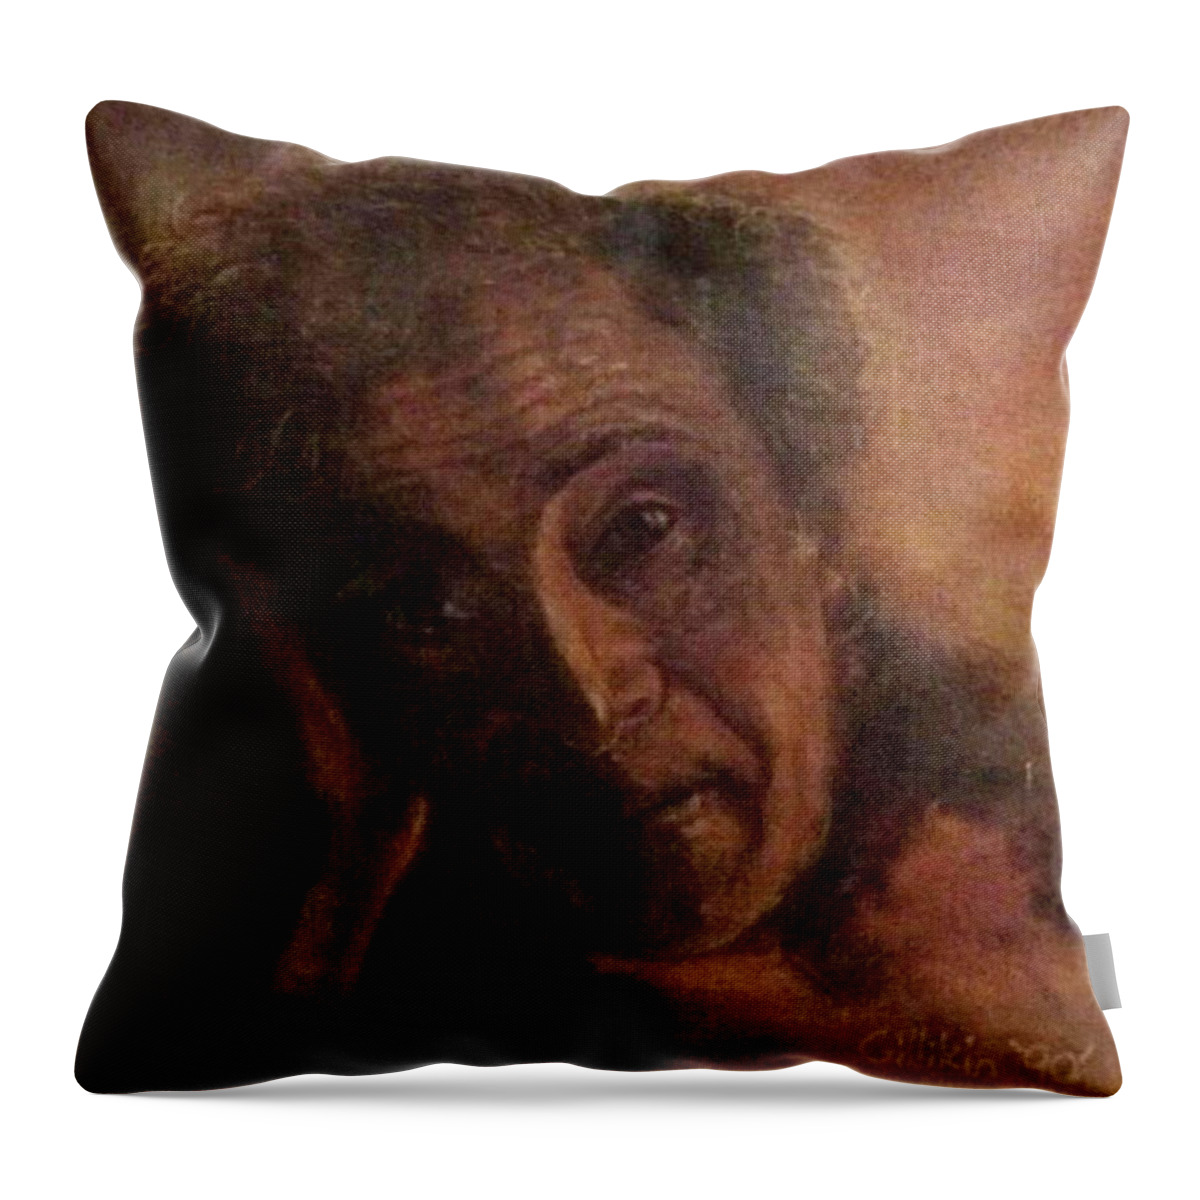 Marc Chagalle Throw Pillow featuring the painting Portrait Of Marc Chagalle by Ryan Almighty